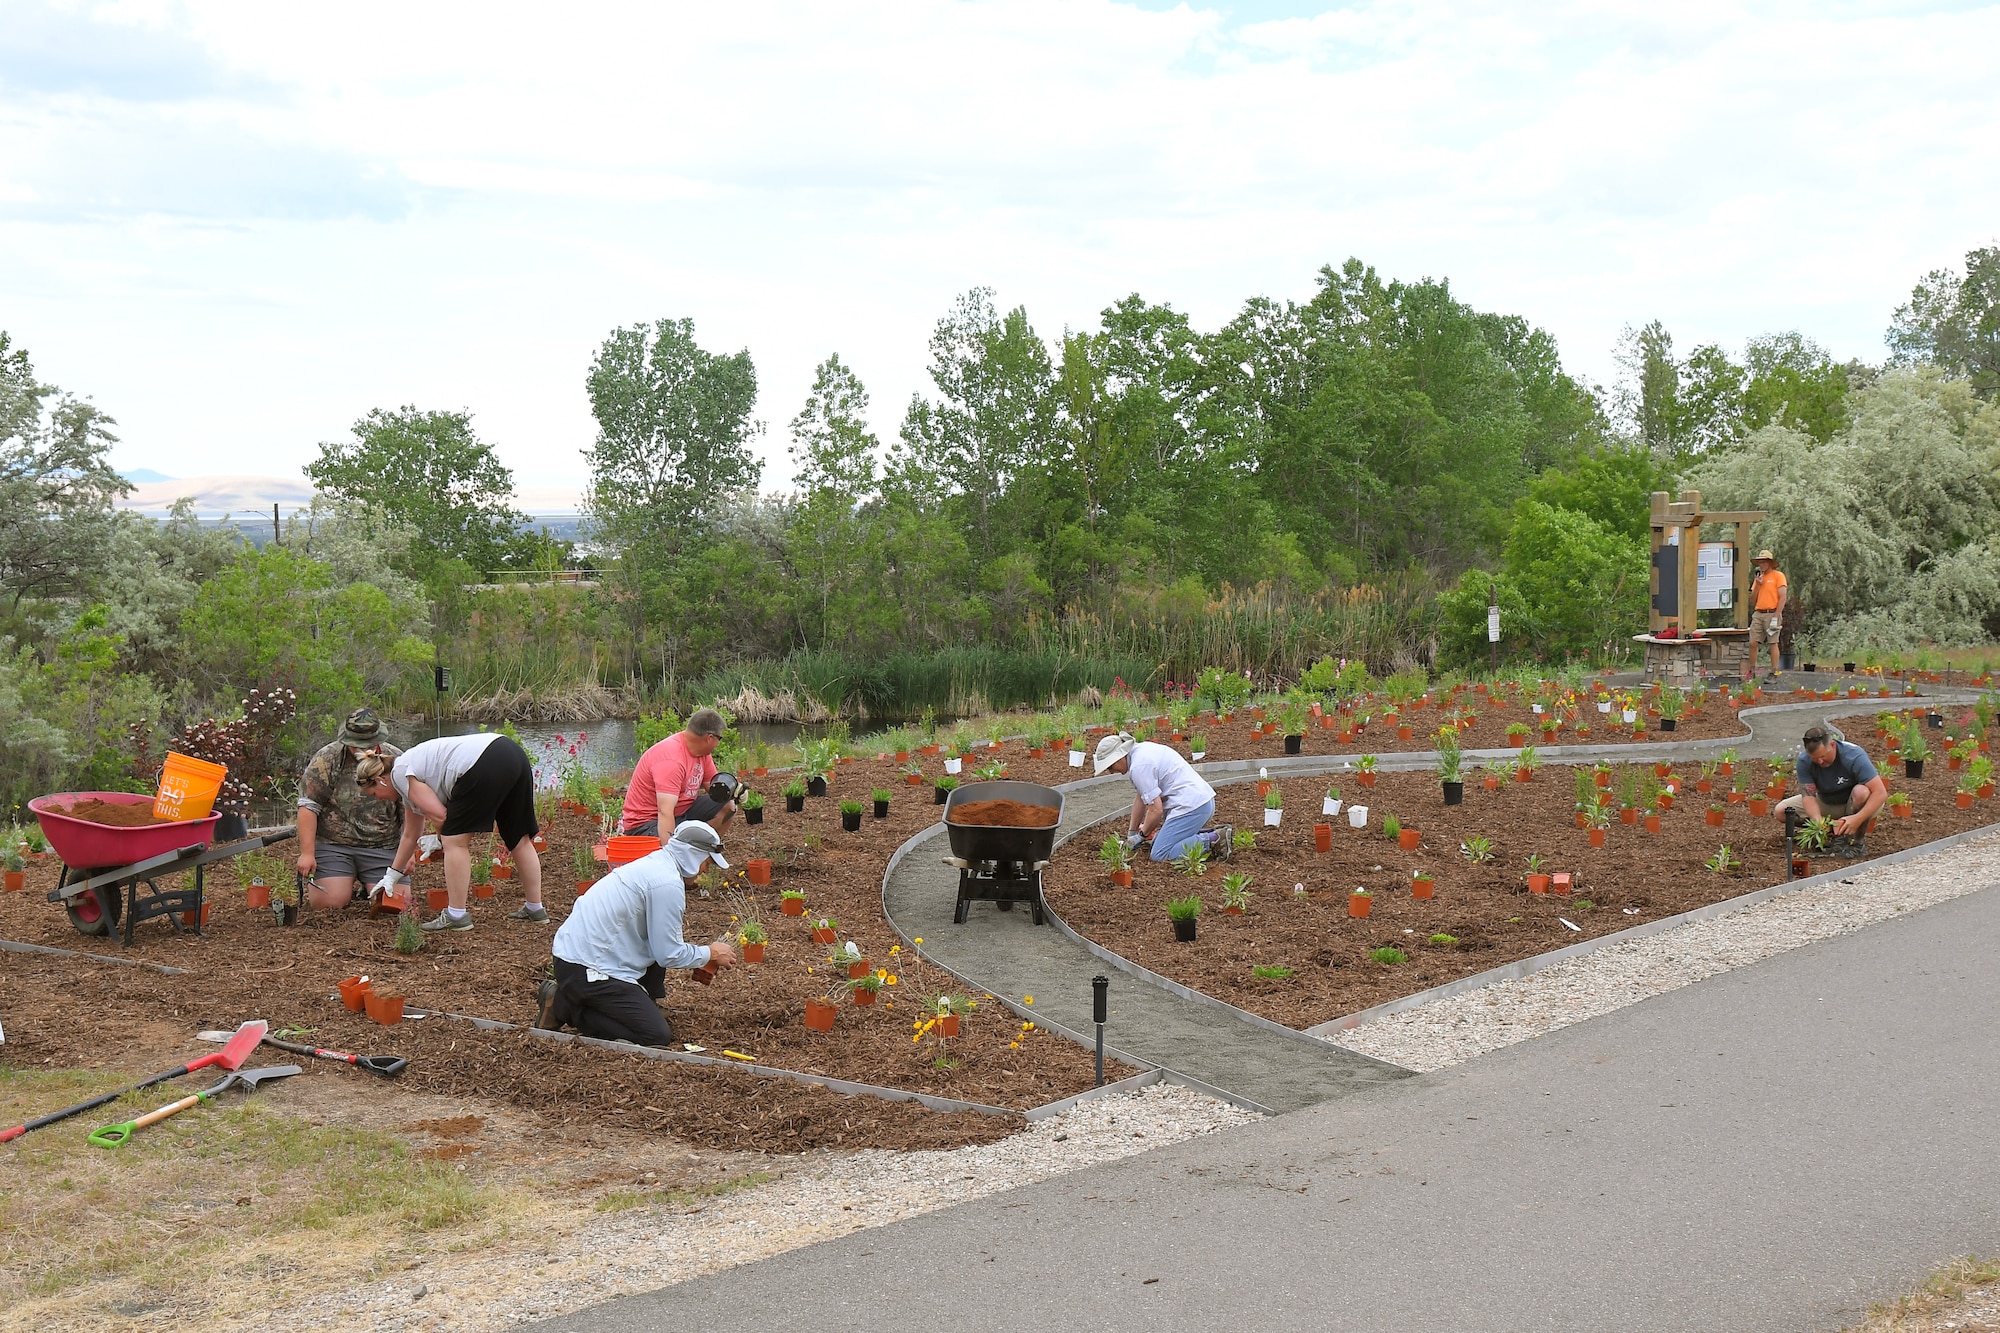 Natural Resource staff and volunteers work together planting a new pollinator garden plot, June 6, 2019, at Hill Air Force Base, Utah. The garden will provide food and habitat for pollinator species such as hummingbirds, bees, and other insects, which are critical to maintaining diverse and healthy ecosystems. (U.S. Air Force photo by Todd Cromar)